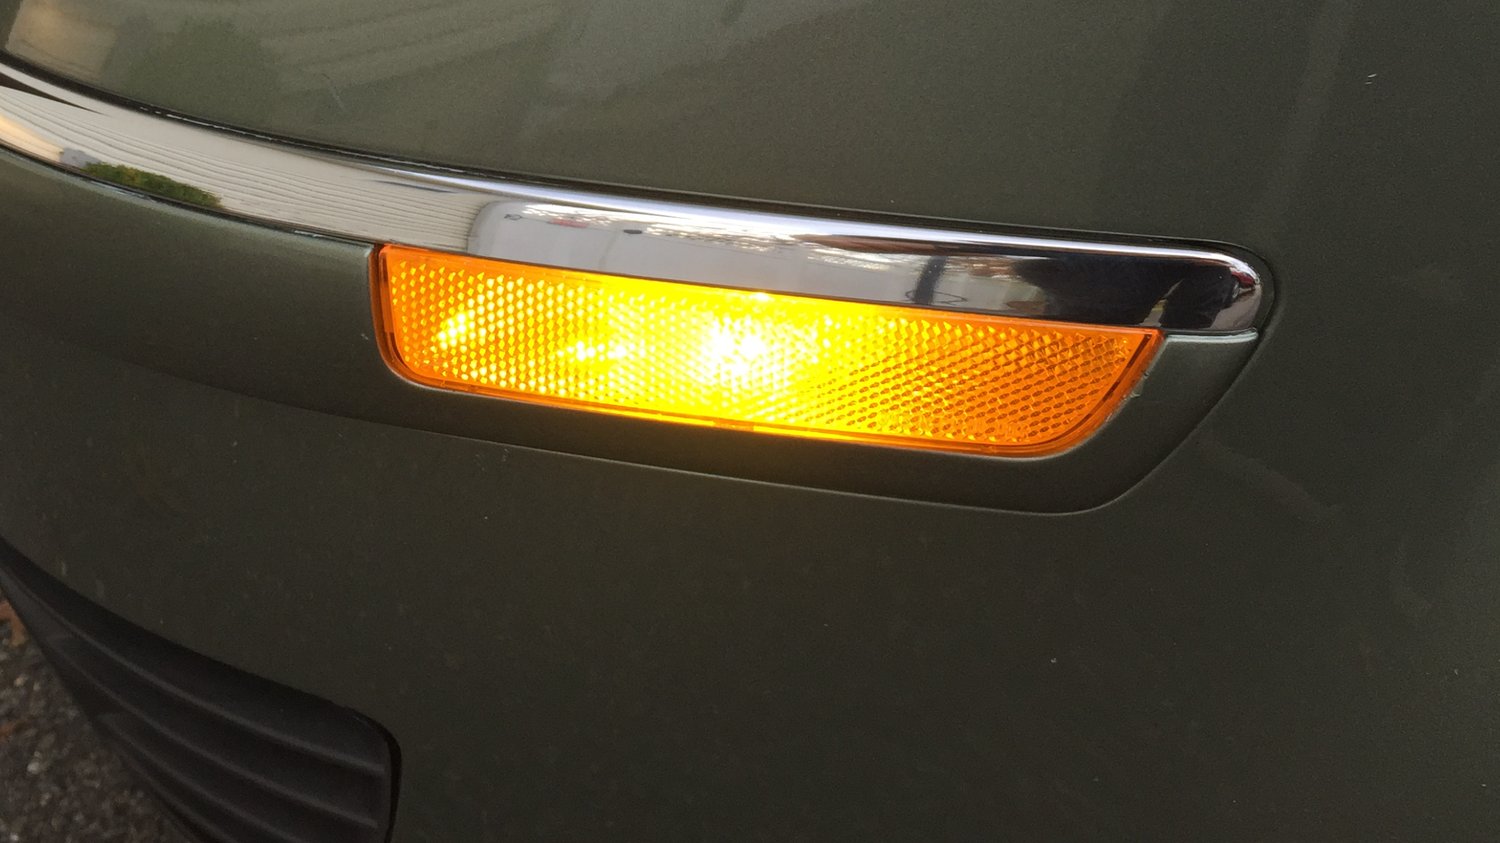 Image of Red, White and Amber Side Markers for the All Volkswagen Models